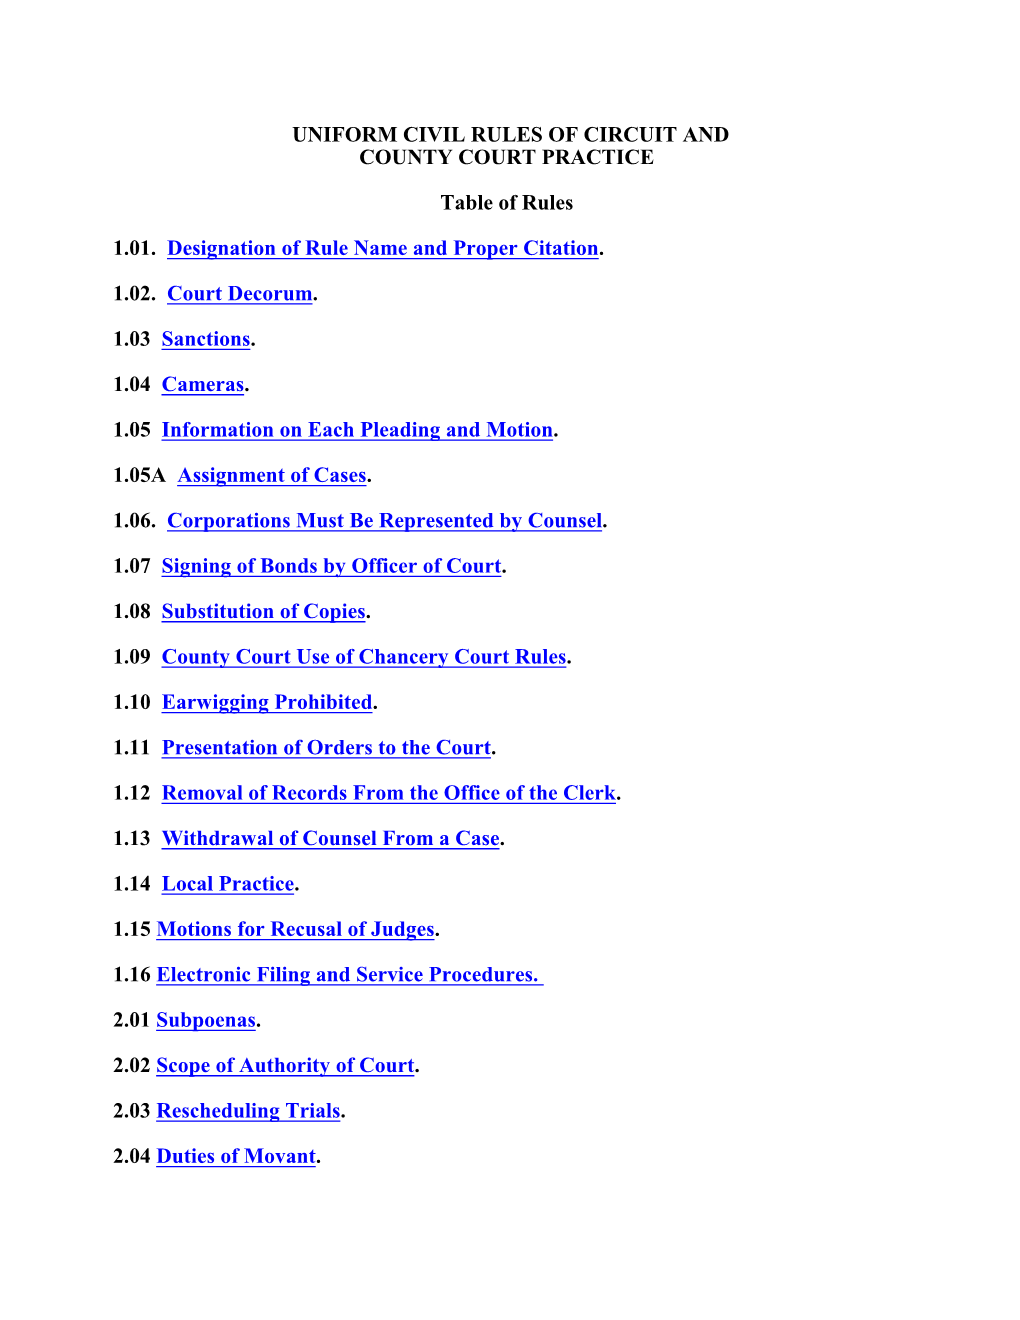 Uniform Civil Rules of Circuit and County Court Practice